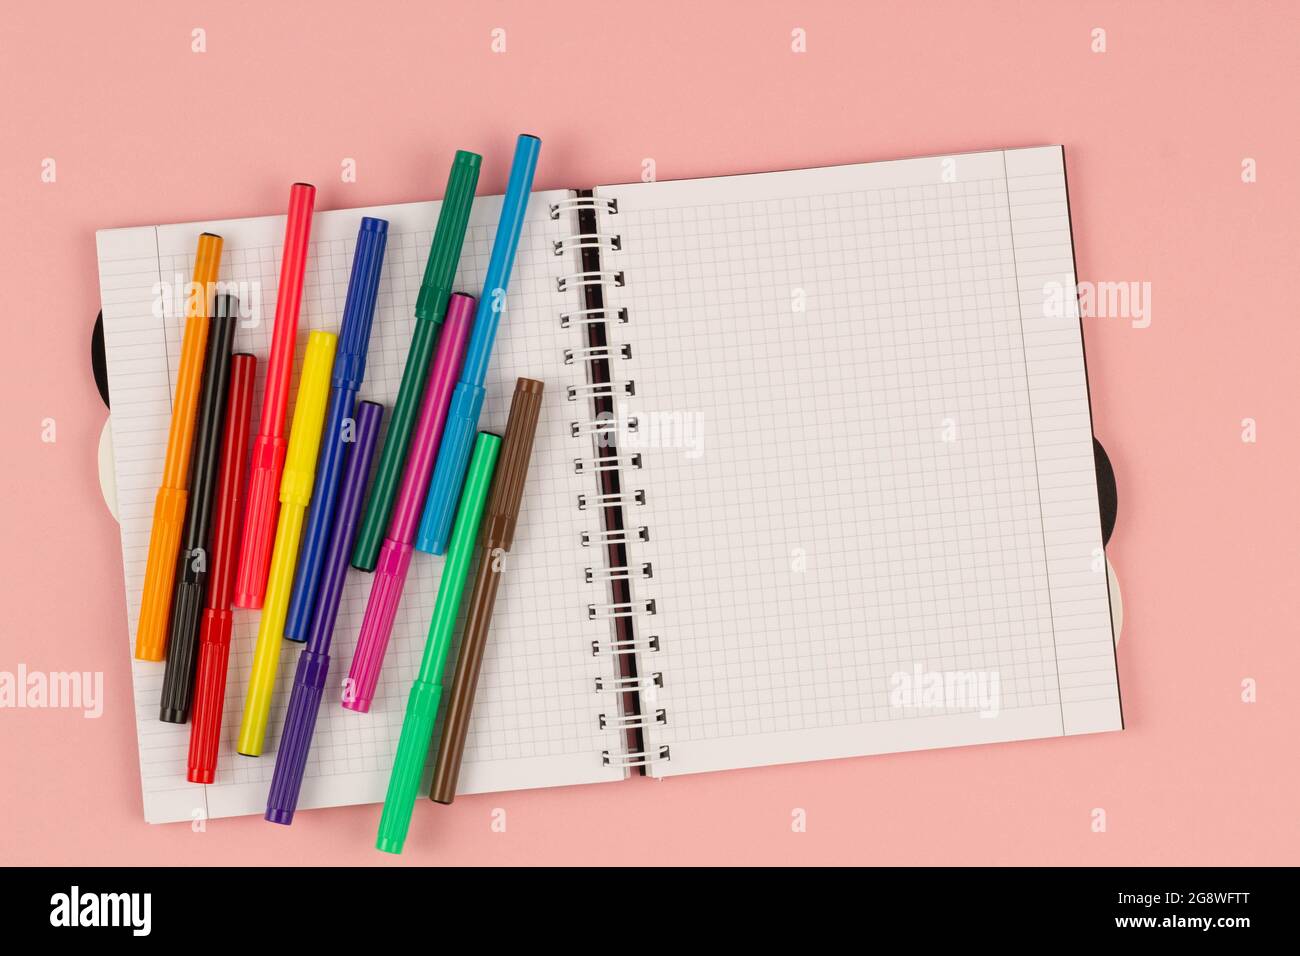 Open school squared notebook and colorful markers on the pink background. Blank white sheet of paper book on the table. Office supplies on the desktop Stock Photo